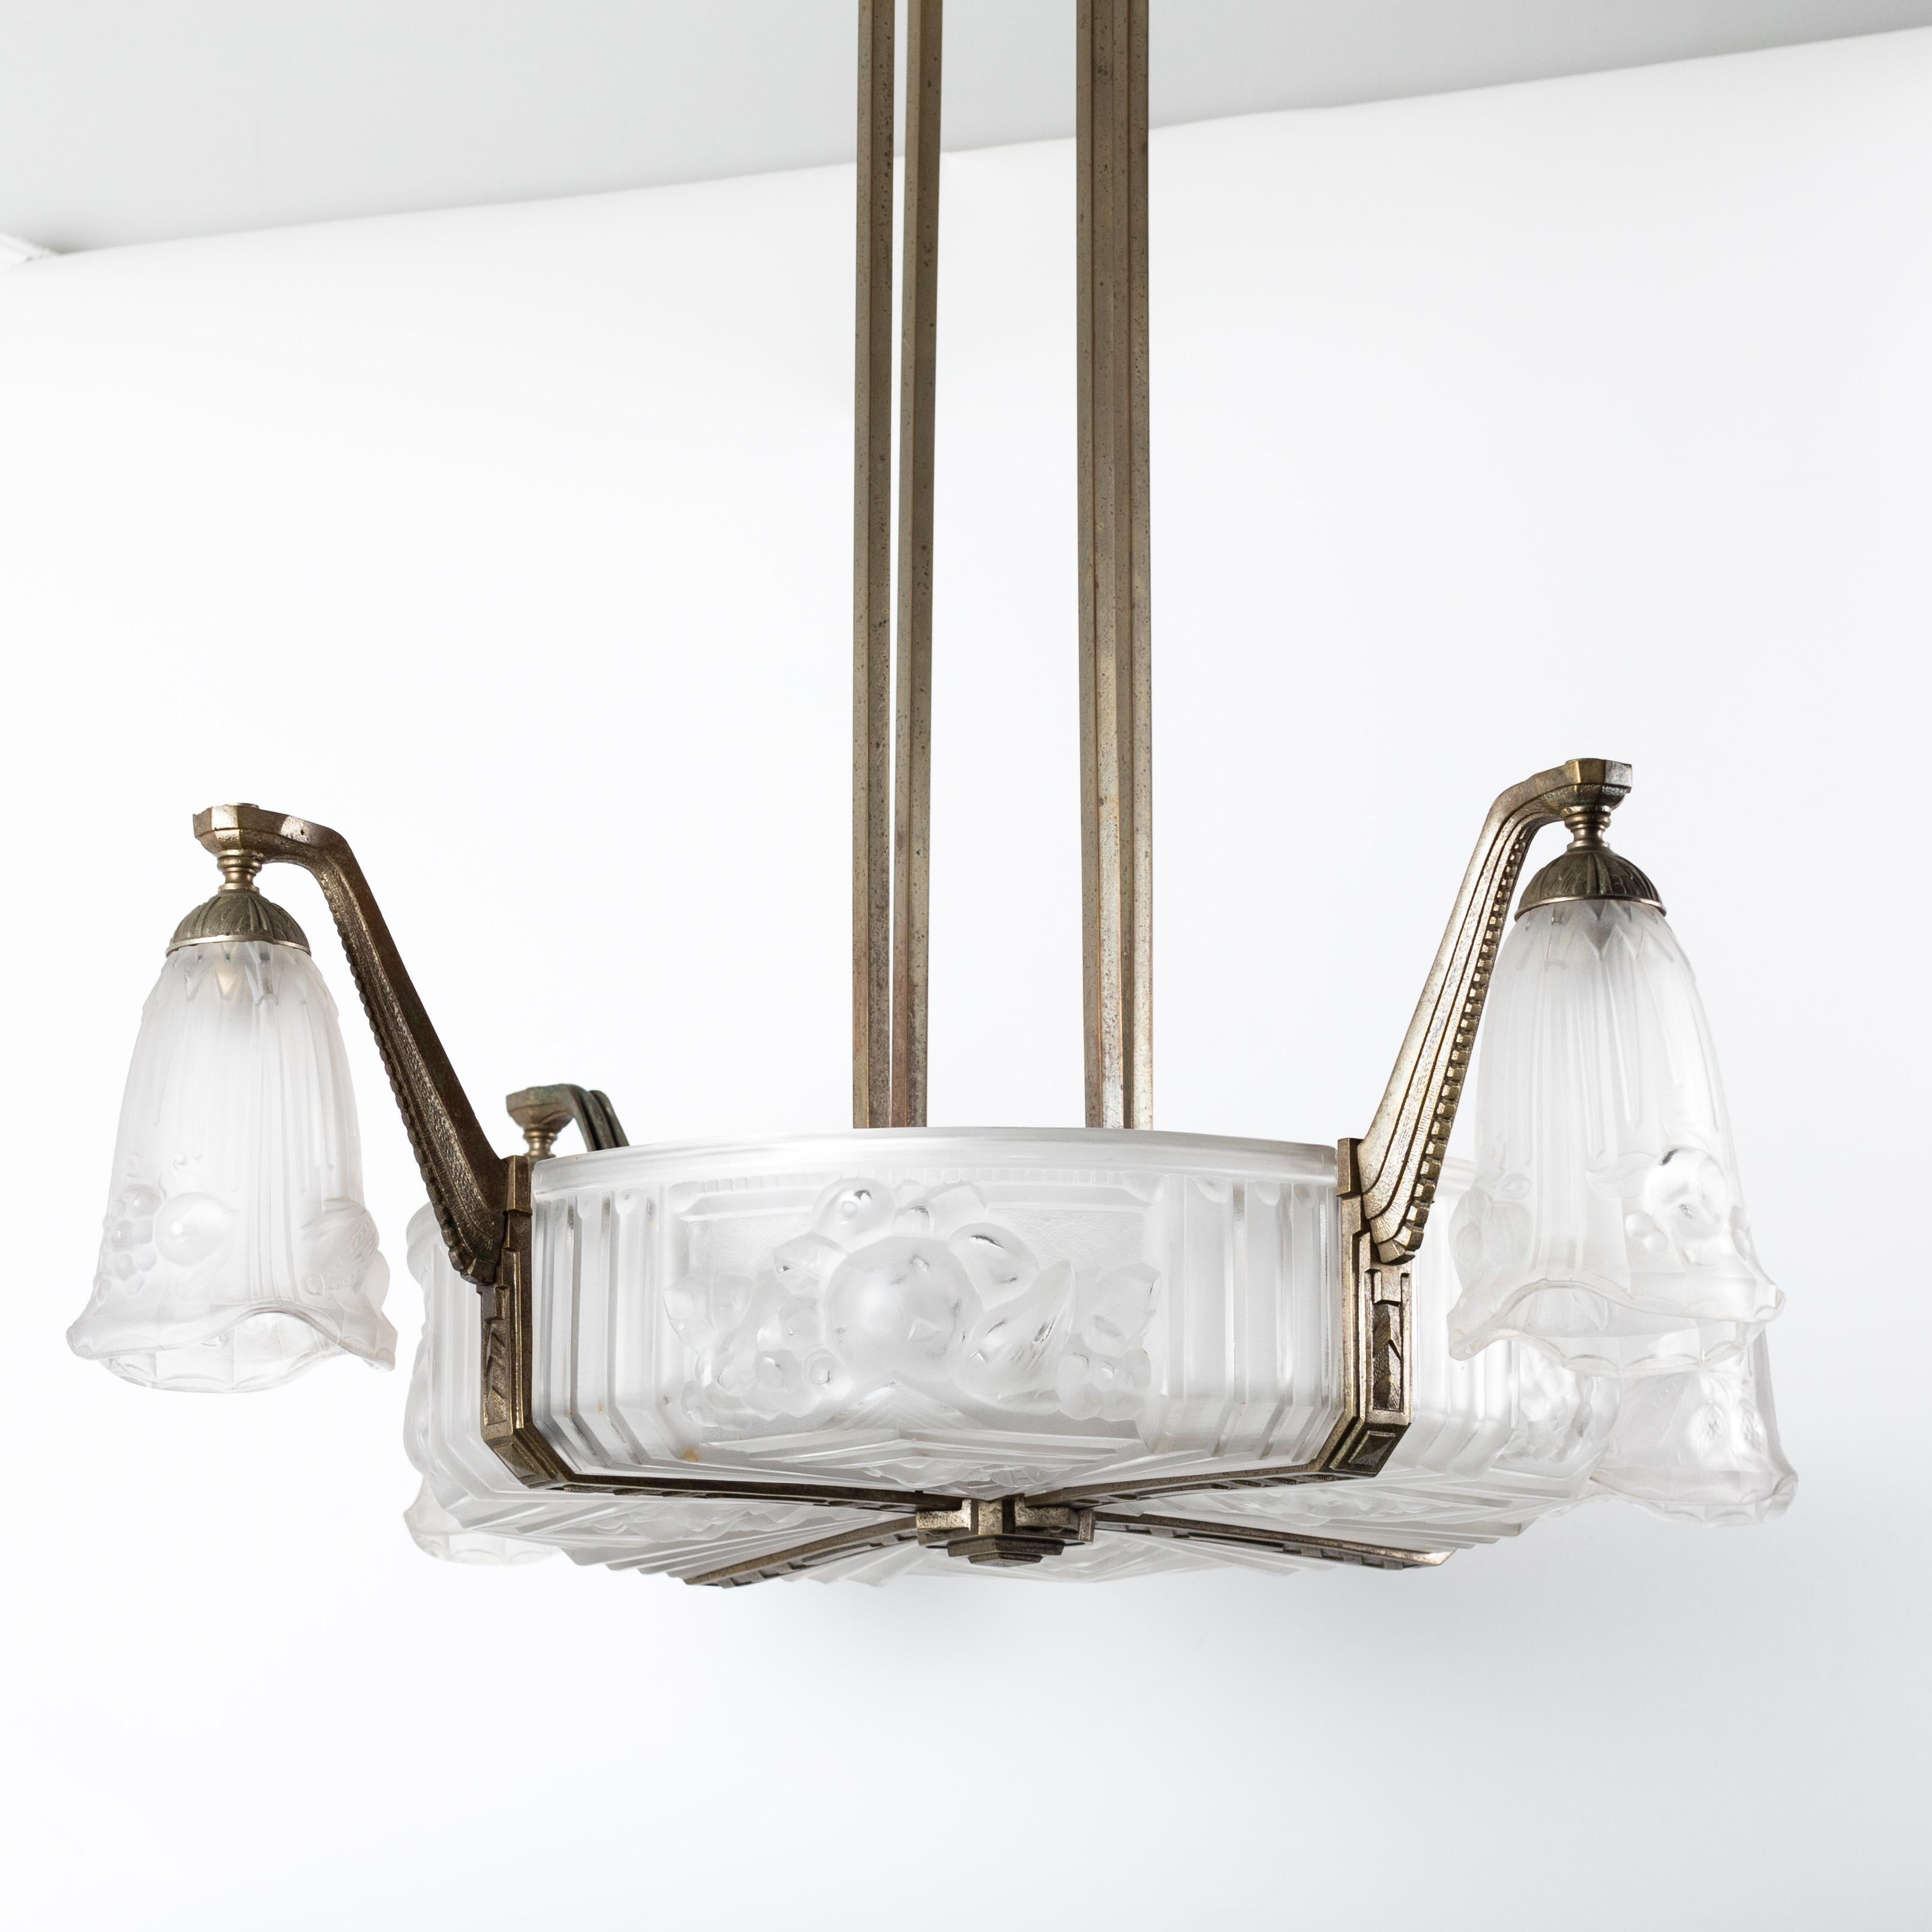 French art deco chandelier by Pierre Gilles

The object is rectilinear and austere in design, the round 4-piece centerpiece has 4 arms in the shape 
of an inverted flower.
The matte pressed glass features both geometric elements and floral elements.